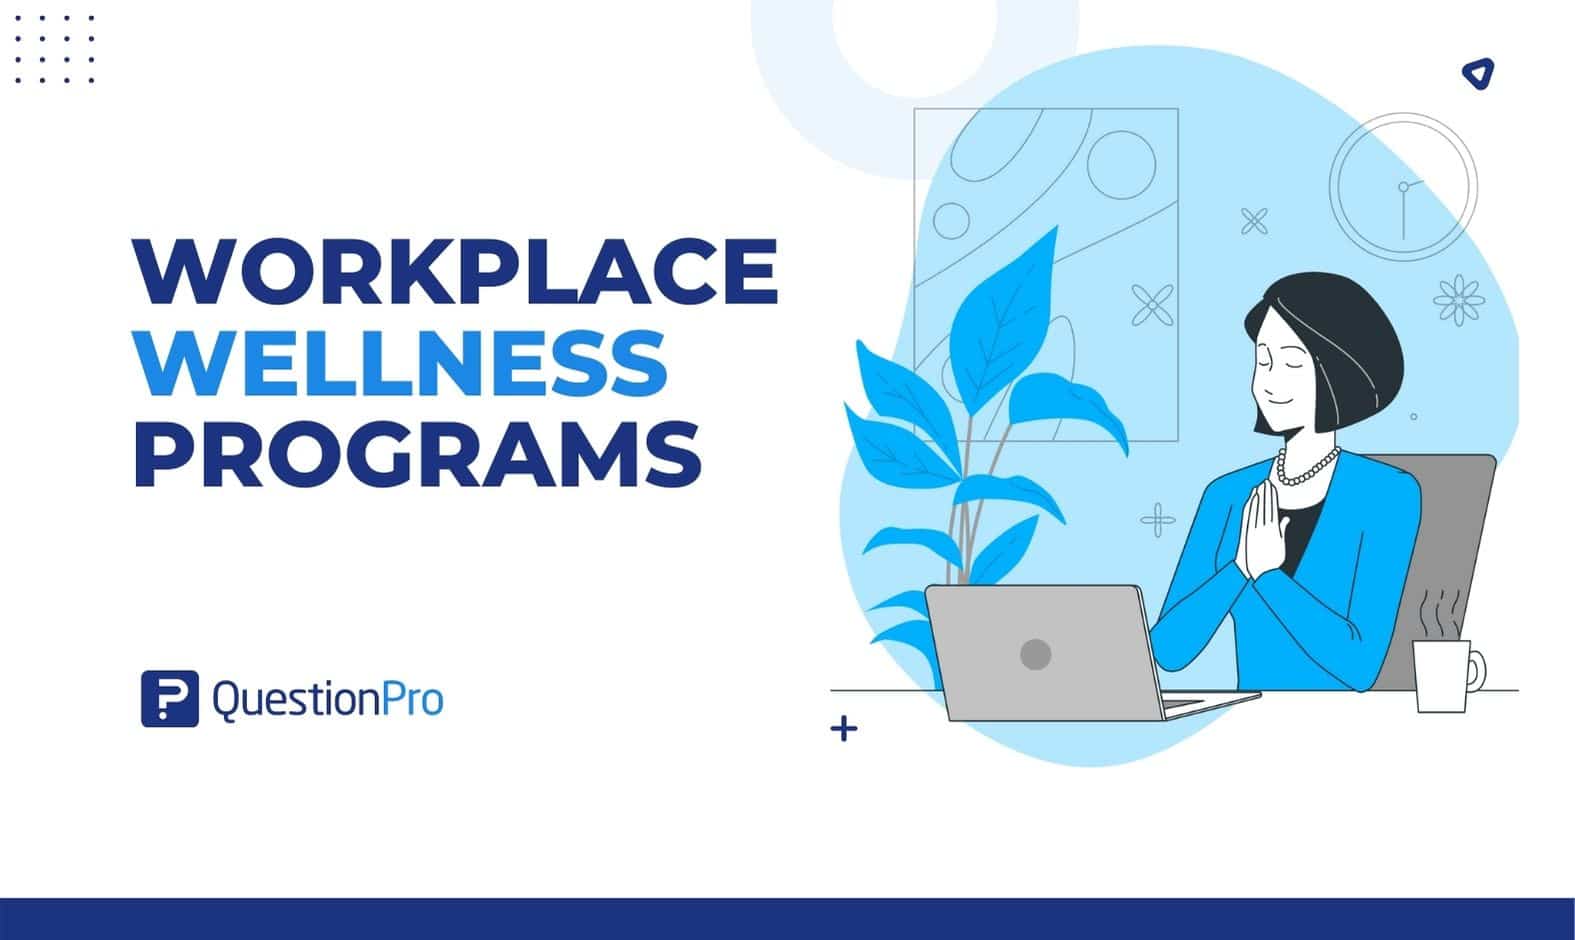 Workplace Wellness Programs are made to help employees be healthier at work, which is a good thing for their well-being. Learn more here.